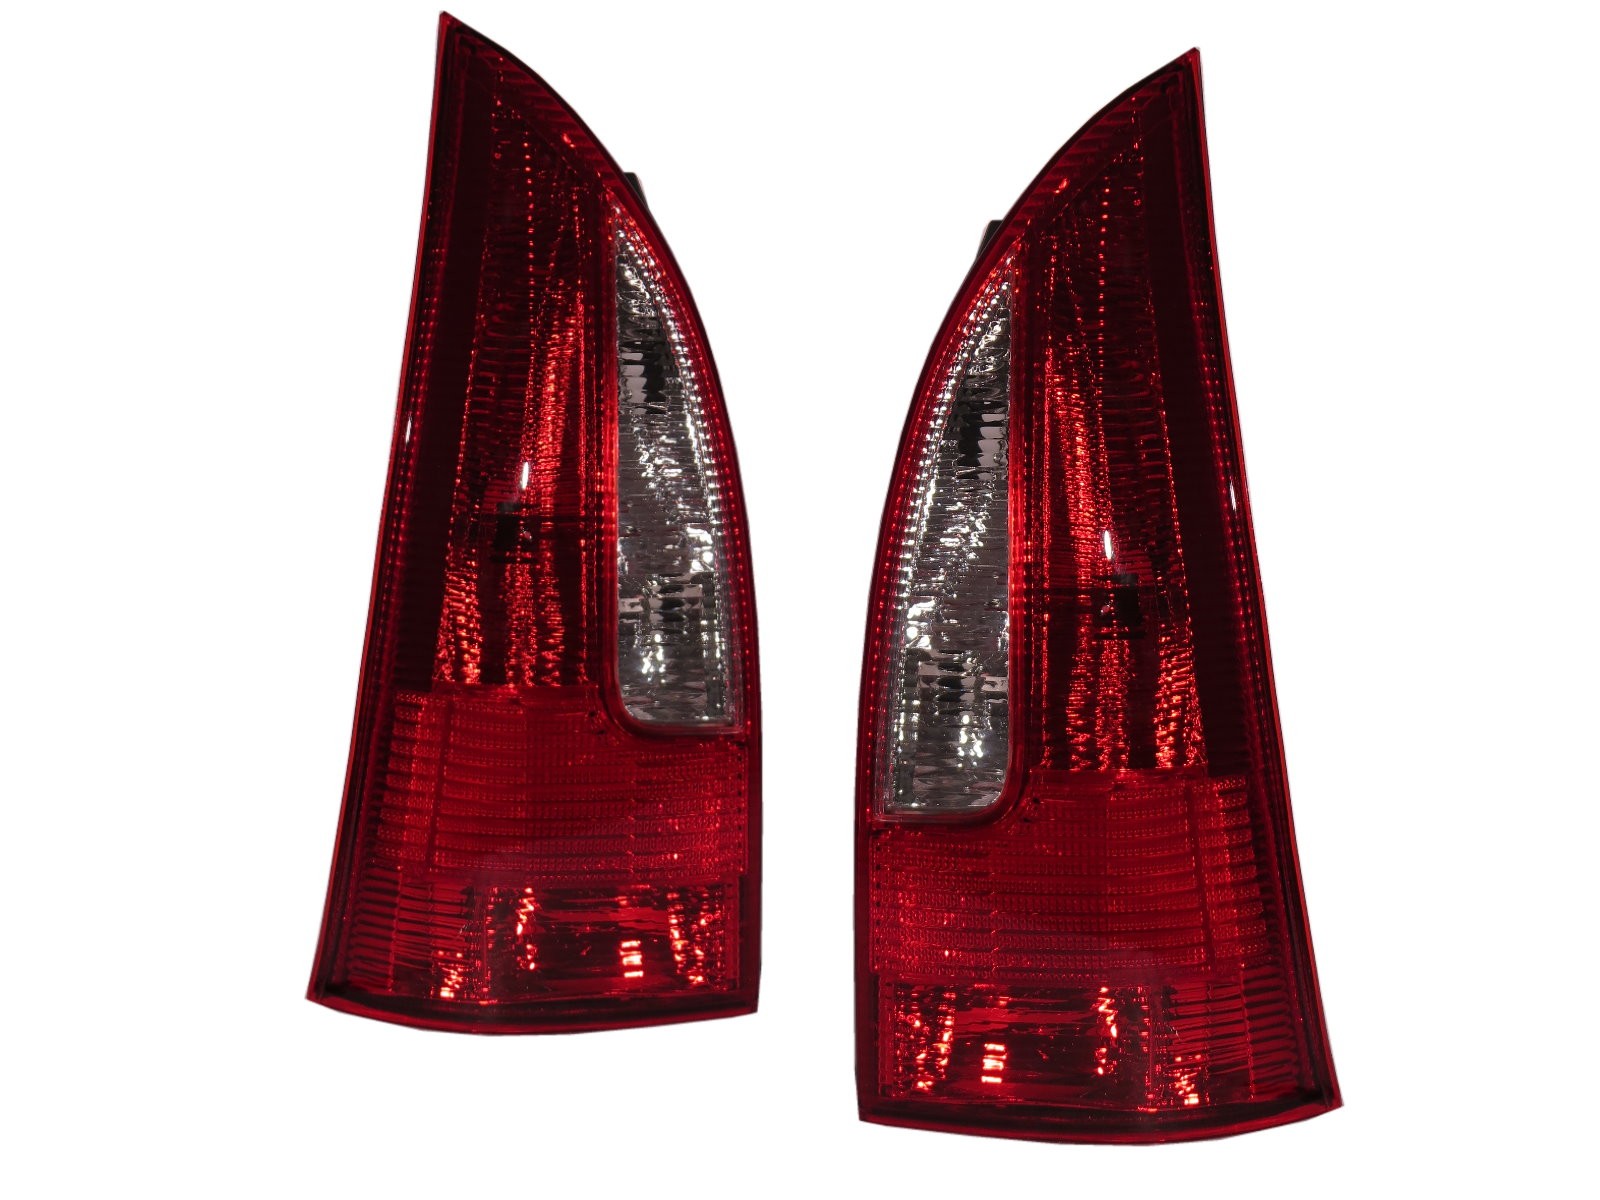 CrazyTheGod PREMACY First generation 1999-2001 PRE-FACELIFT MPV 5D Clear Tail Rear Light Red for MAZDA